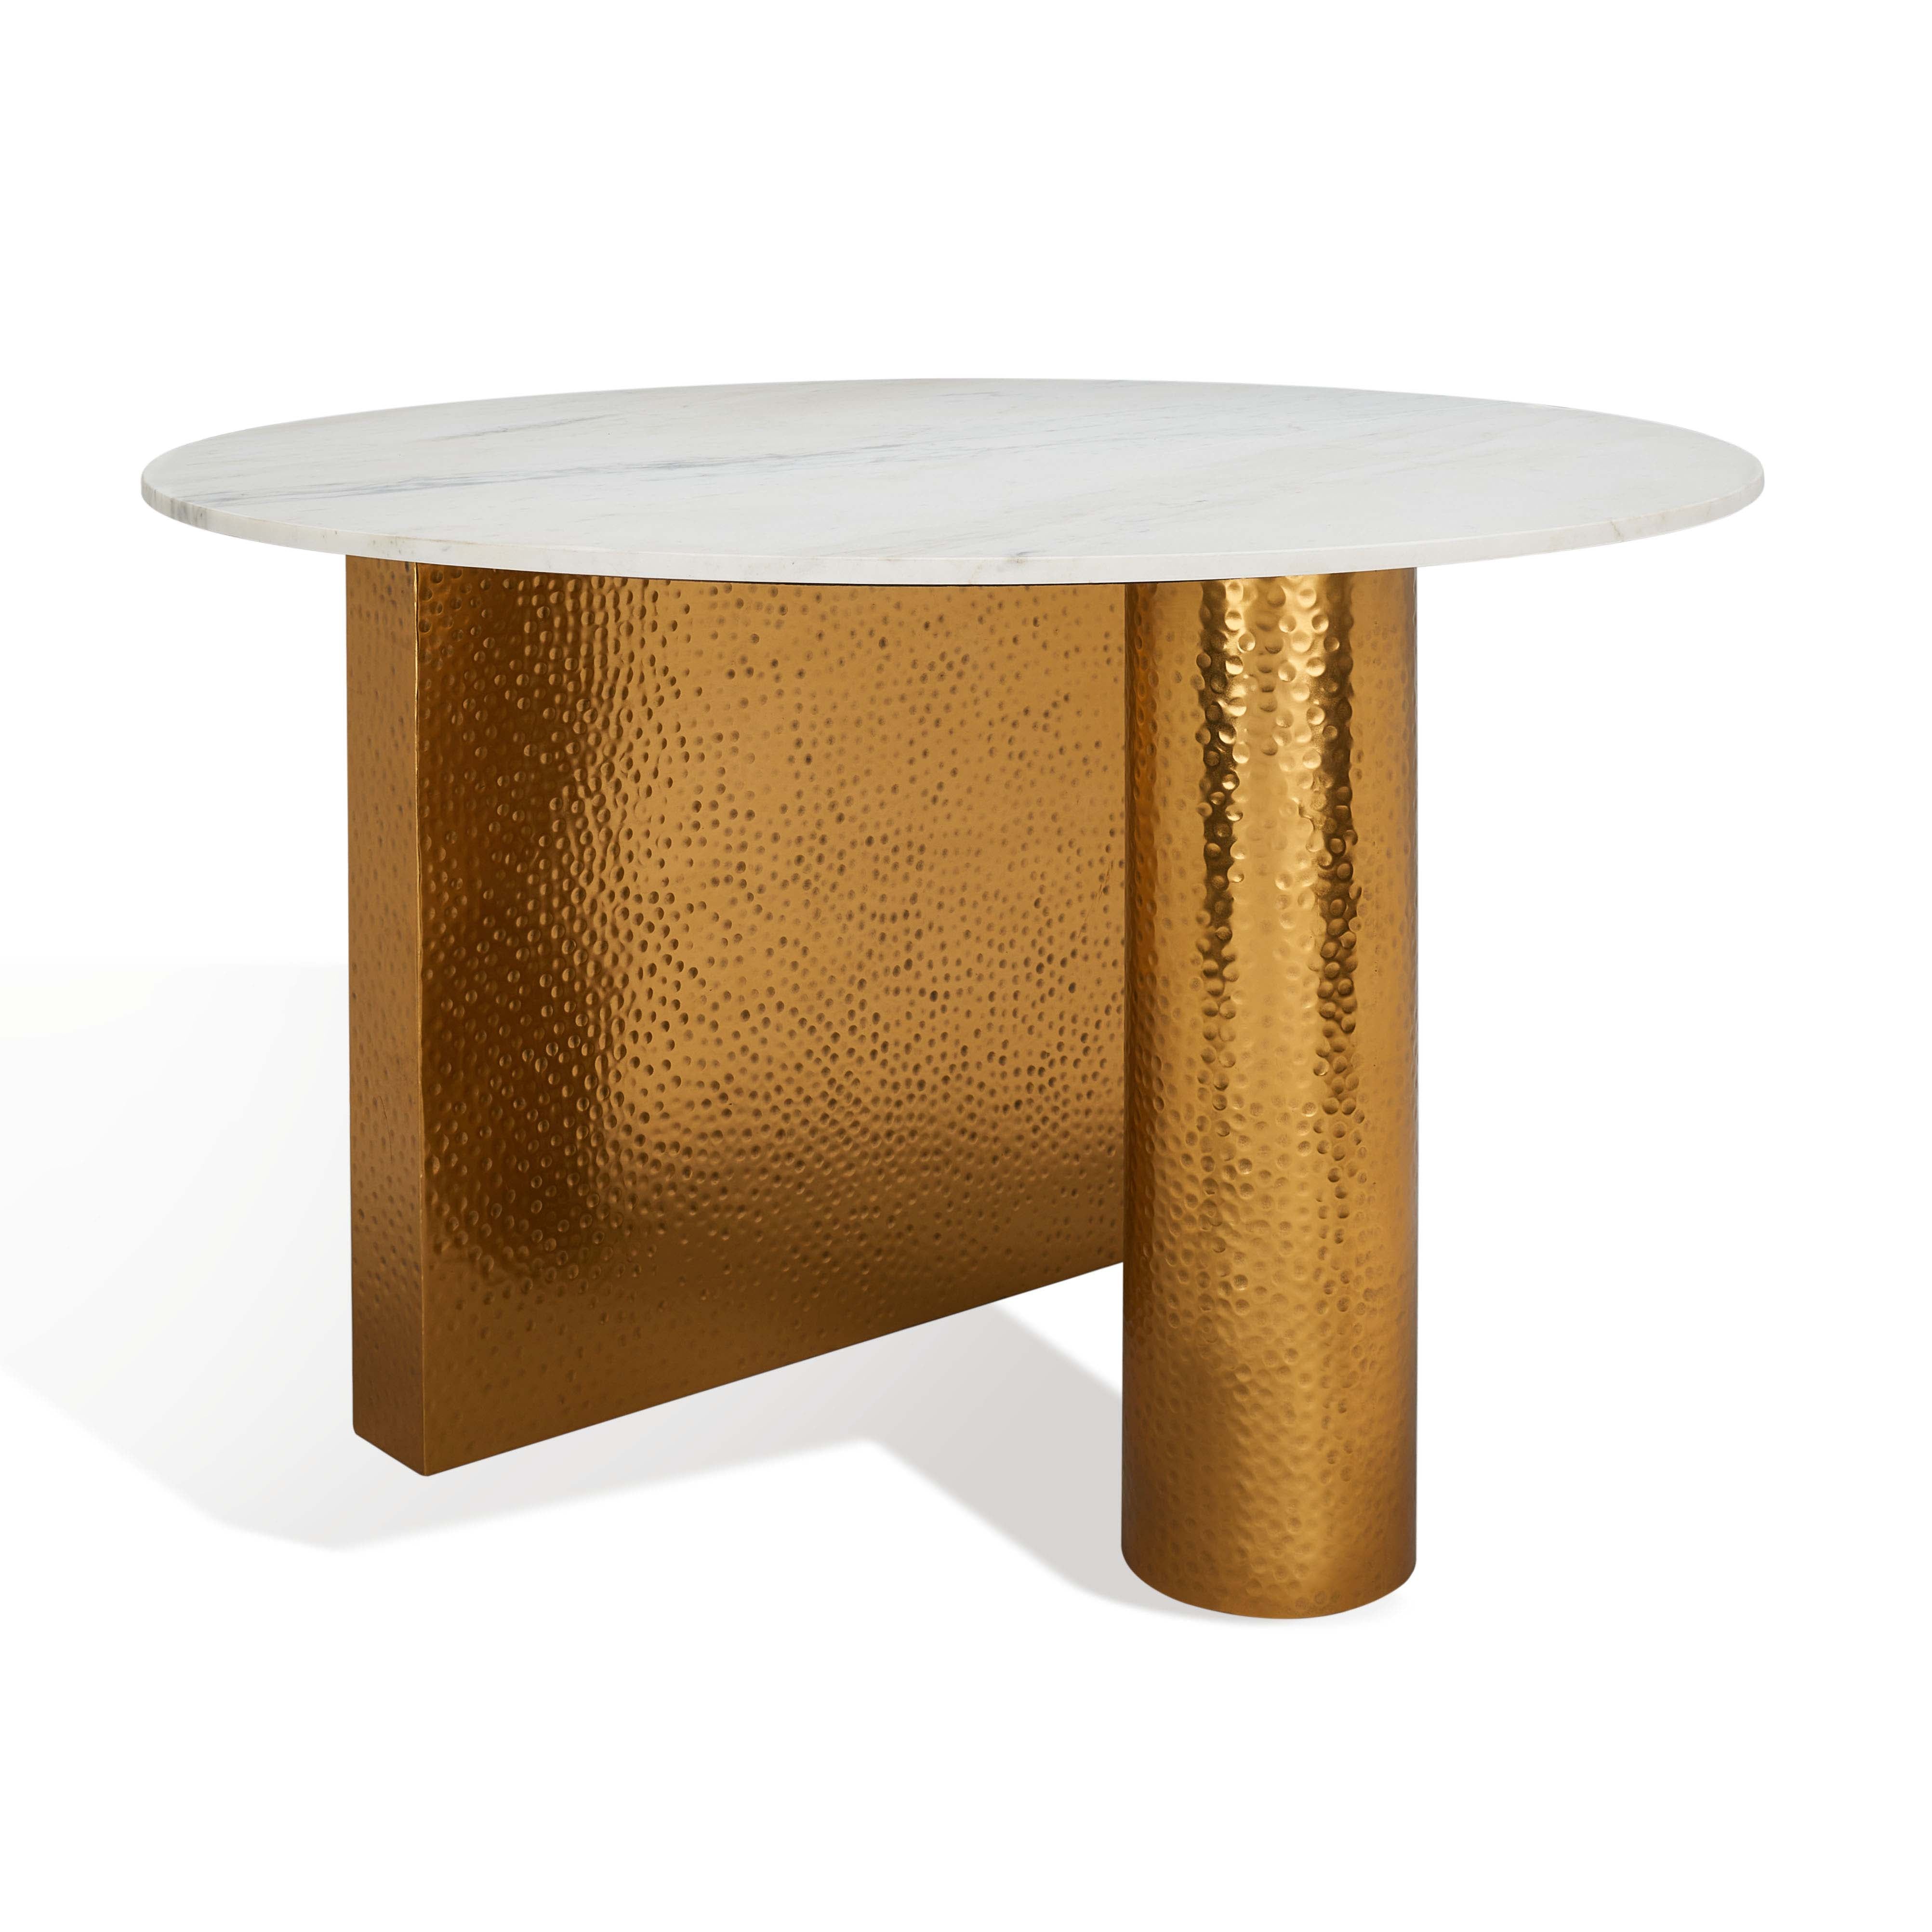 Safavieh Couture Tatyana Marble Dining Table